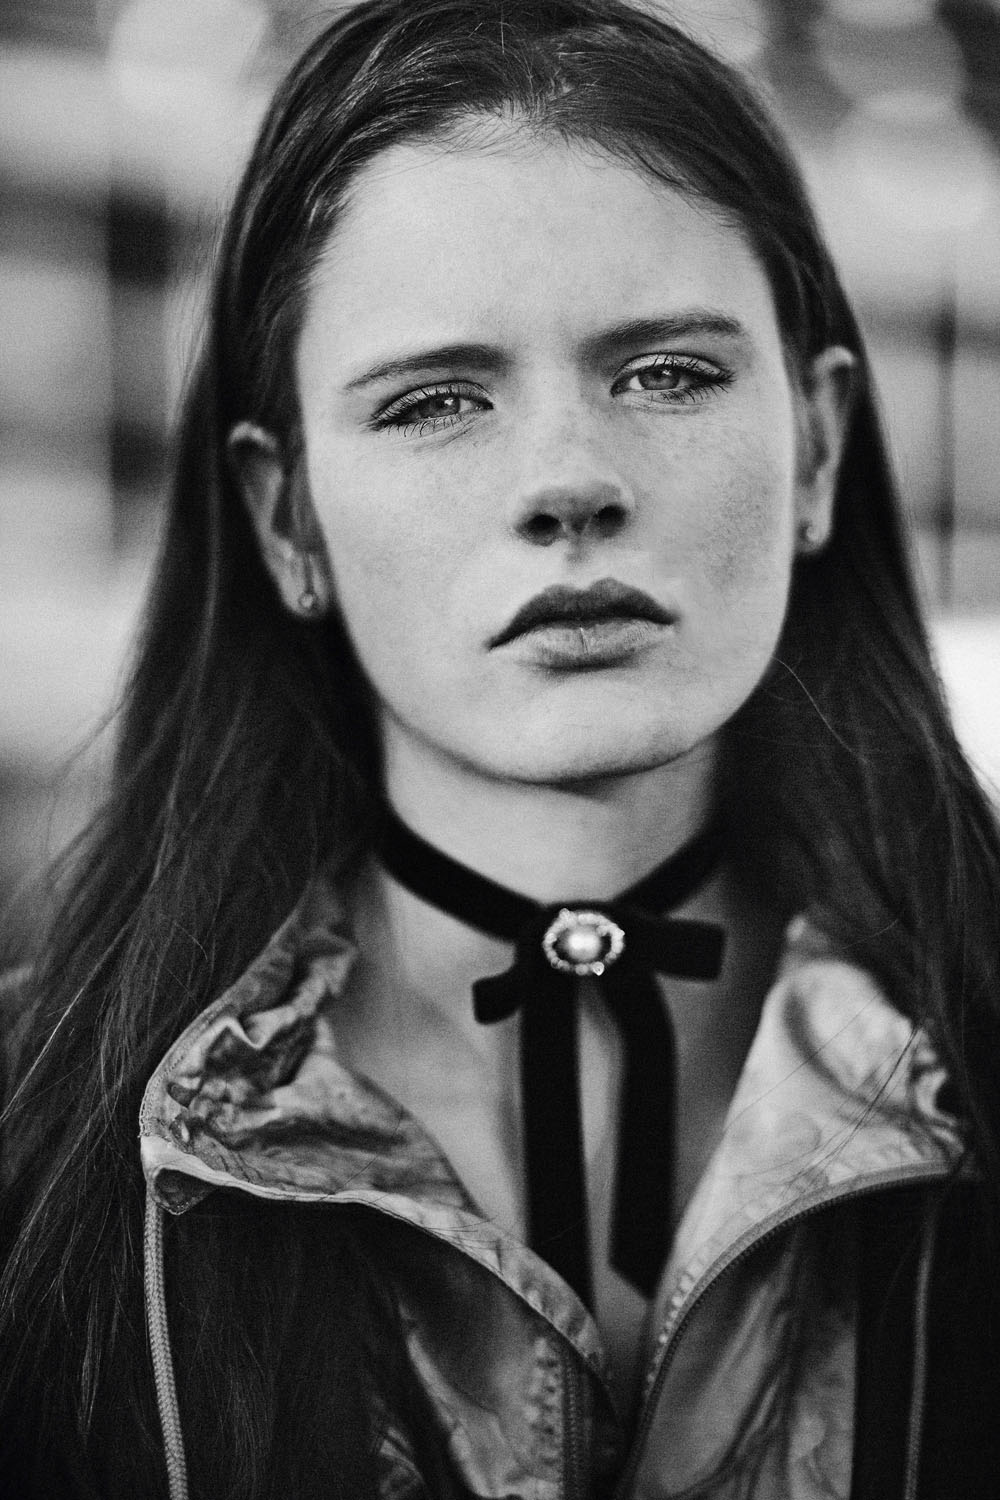 CHASSEUR WEBDITORIAL : MONOCHROME MOMENTS BY VERONIKA BURES - Chasseur ...